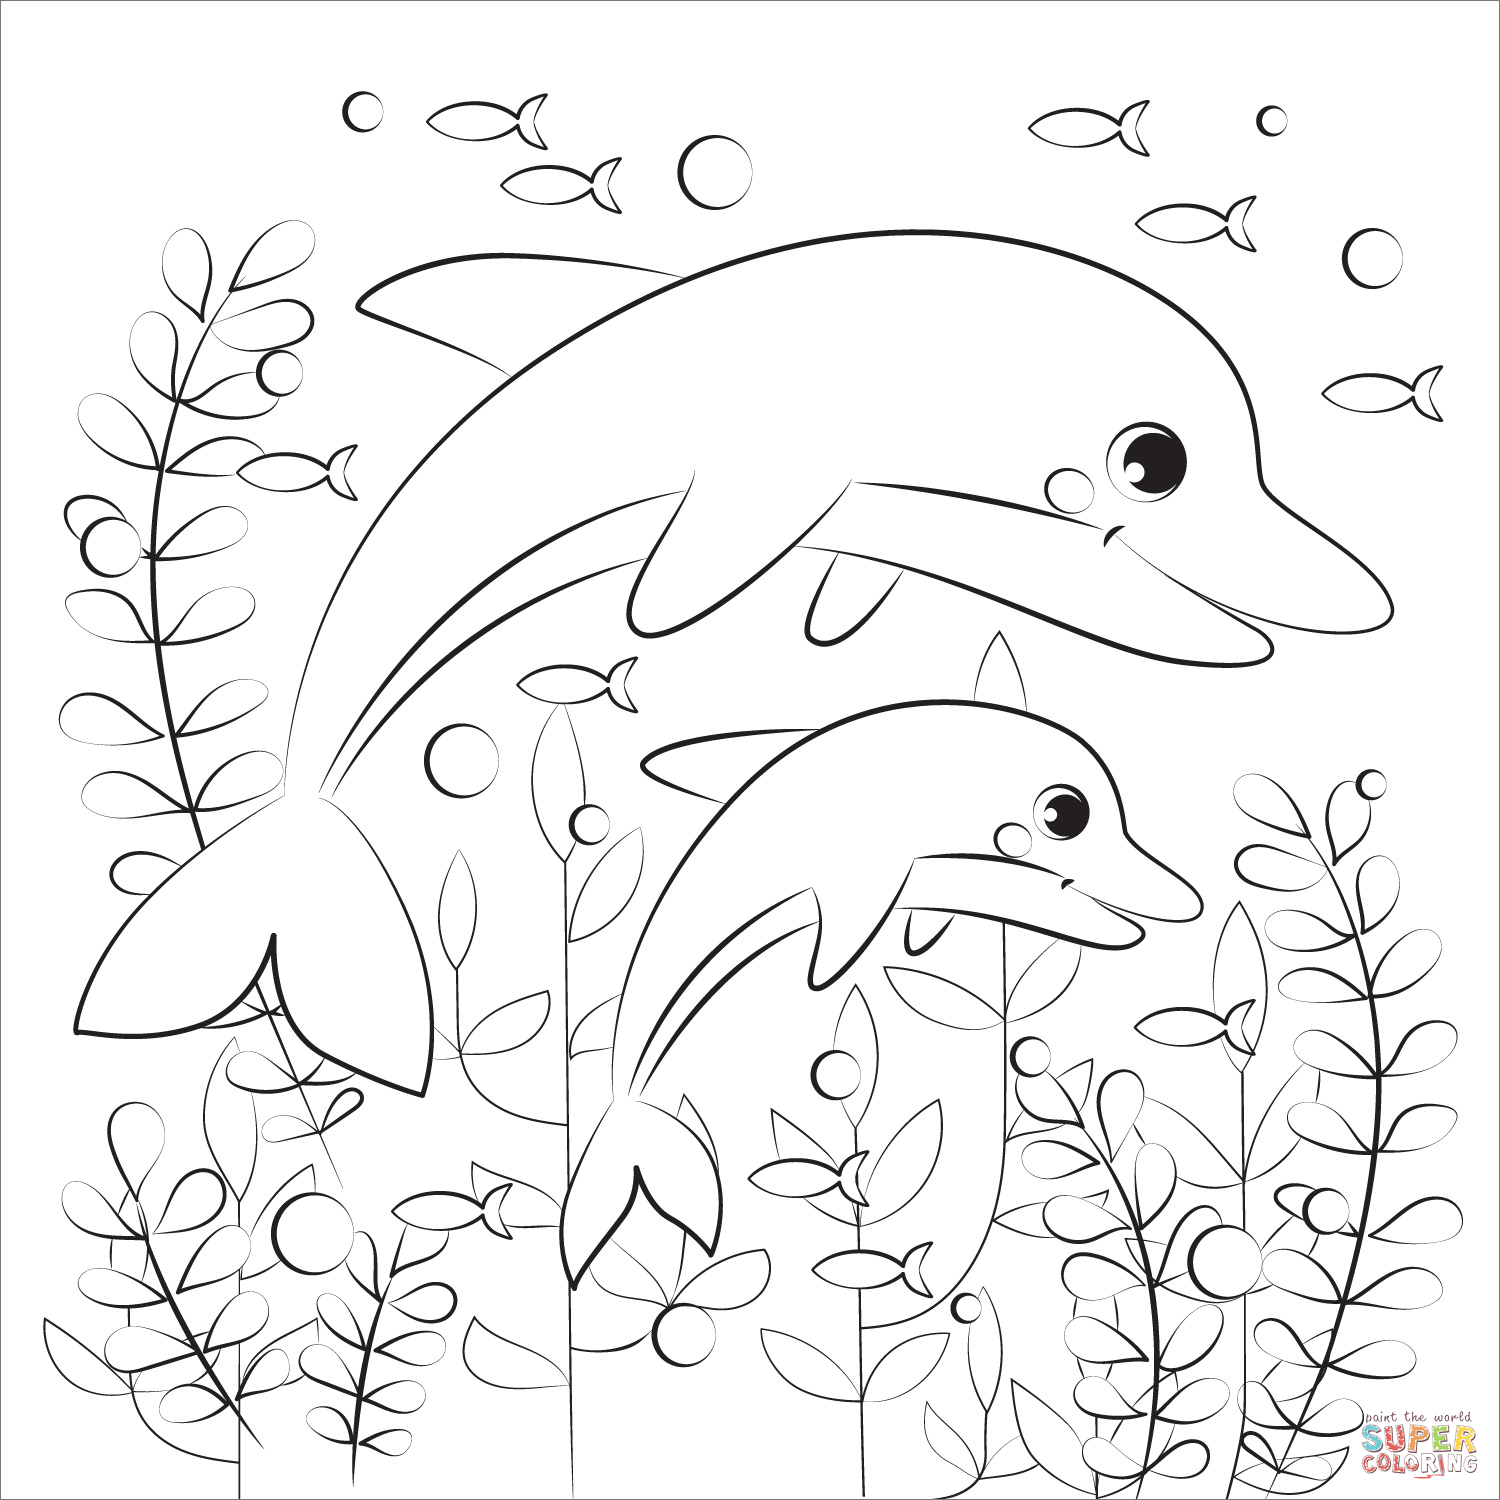 Dolphin coloring page | Free Printable Coloring Pages